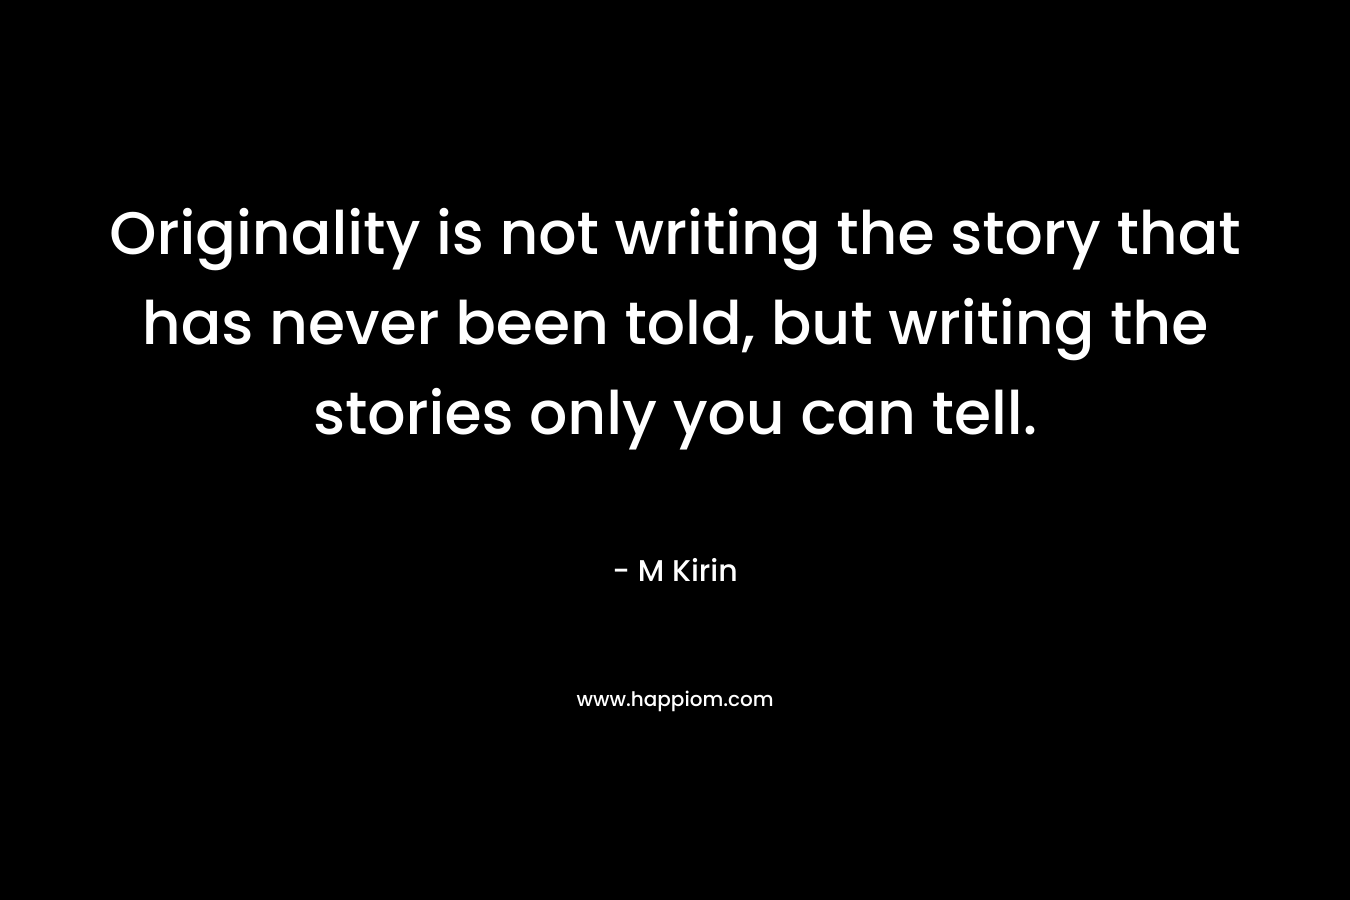 Originality is not writing the story that has never been told, but writing the stories only you can tell.